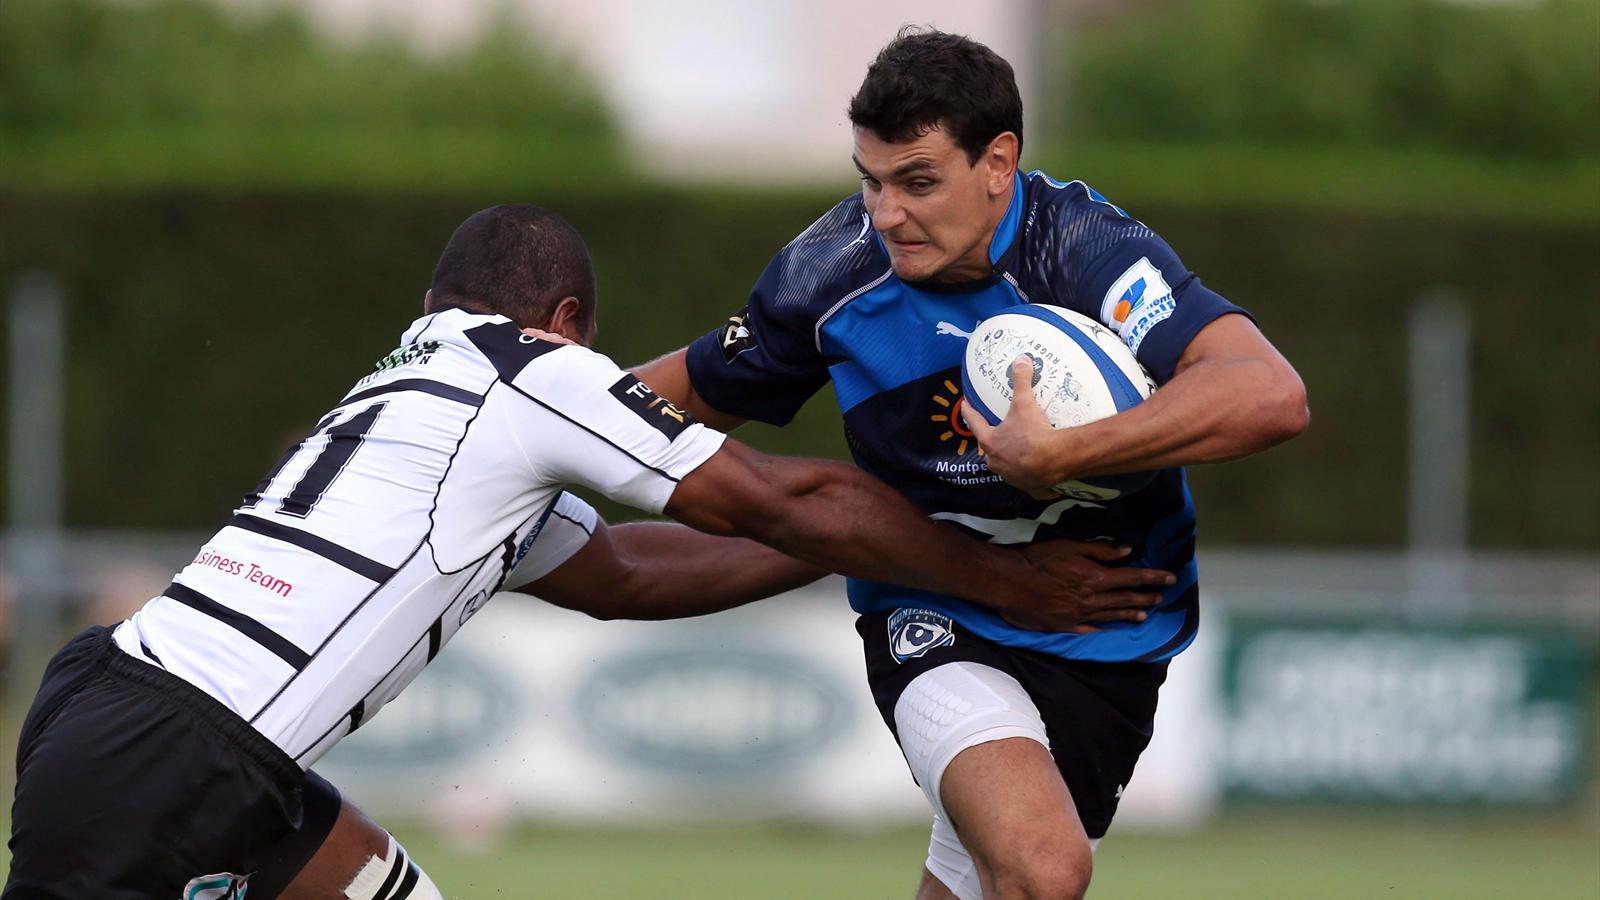 Rugby Top 14: Match Montpellier HR vs CA Brive en direct live streaming